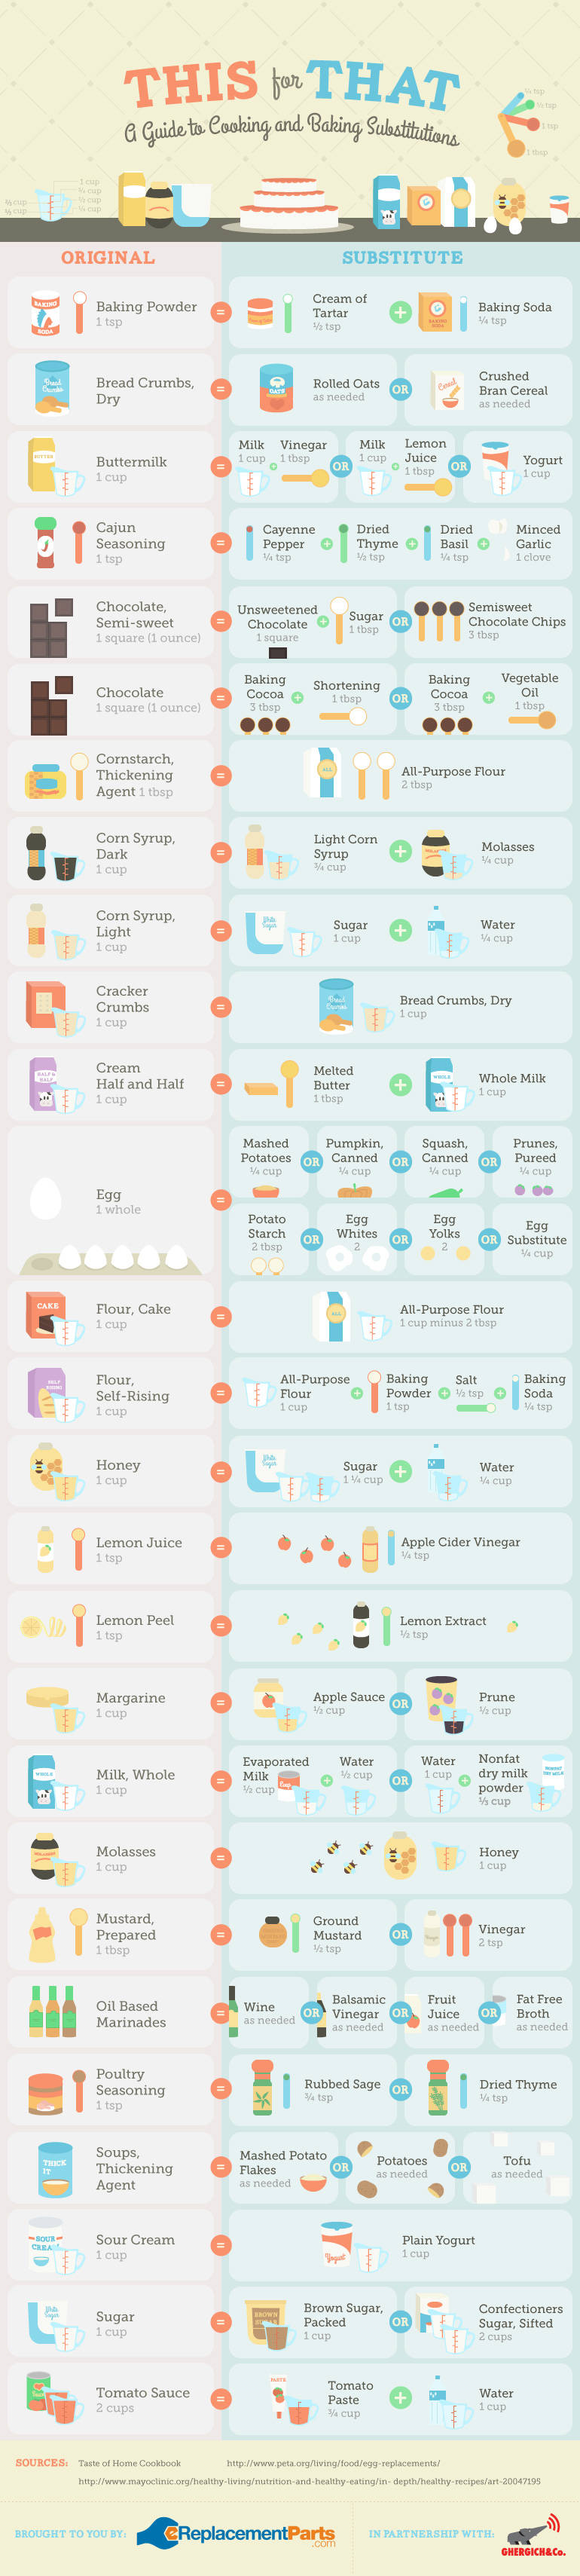 Guide to Cooking And Baking Substitutions